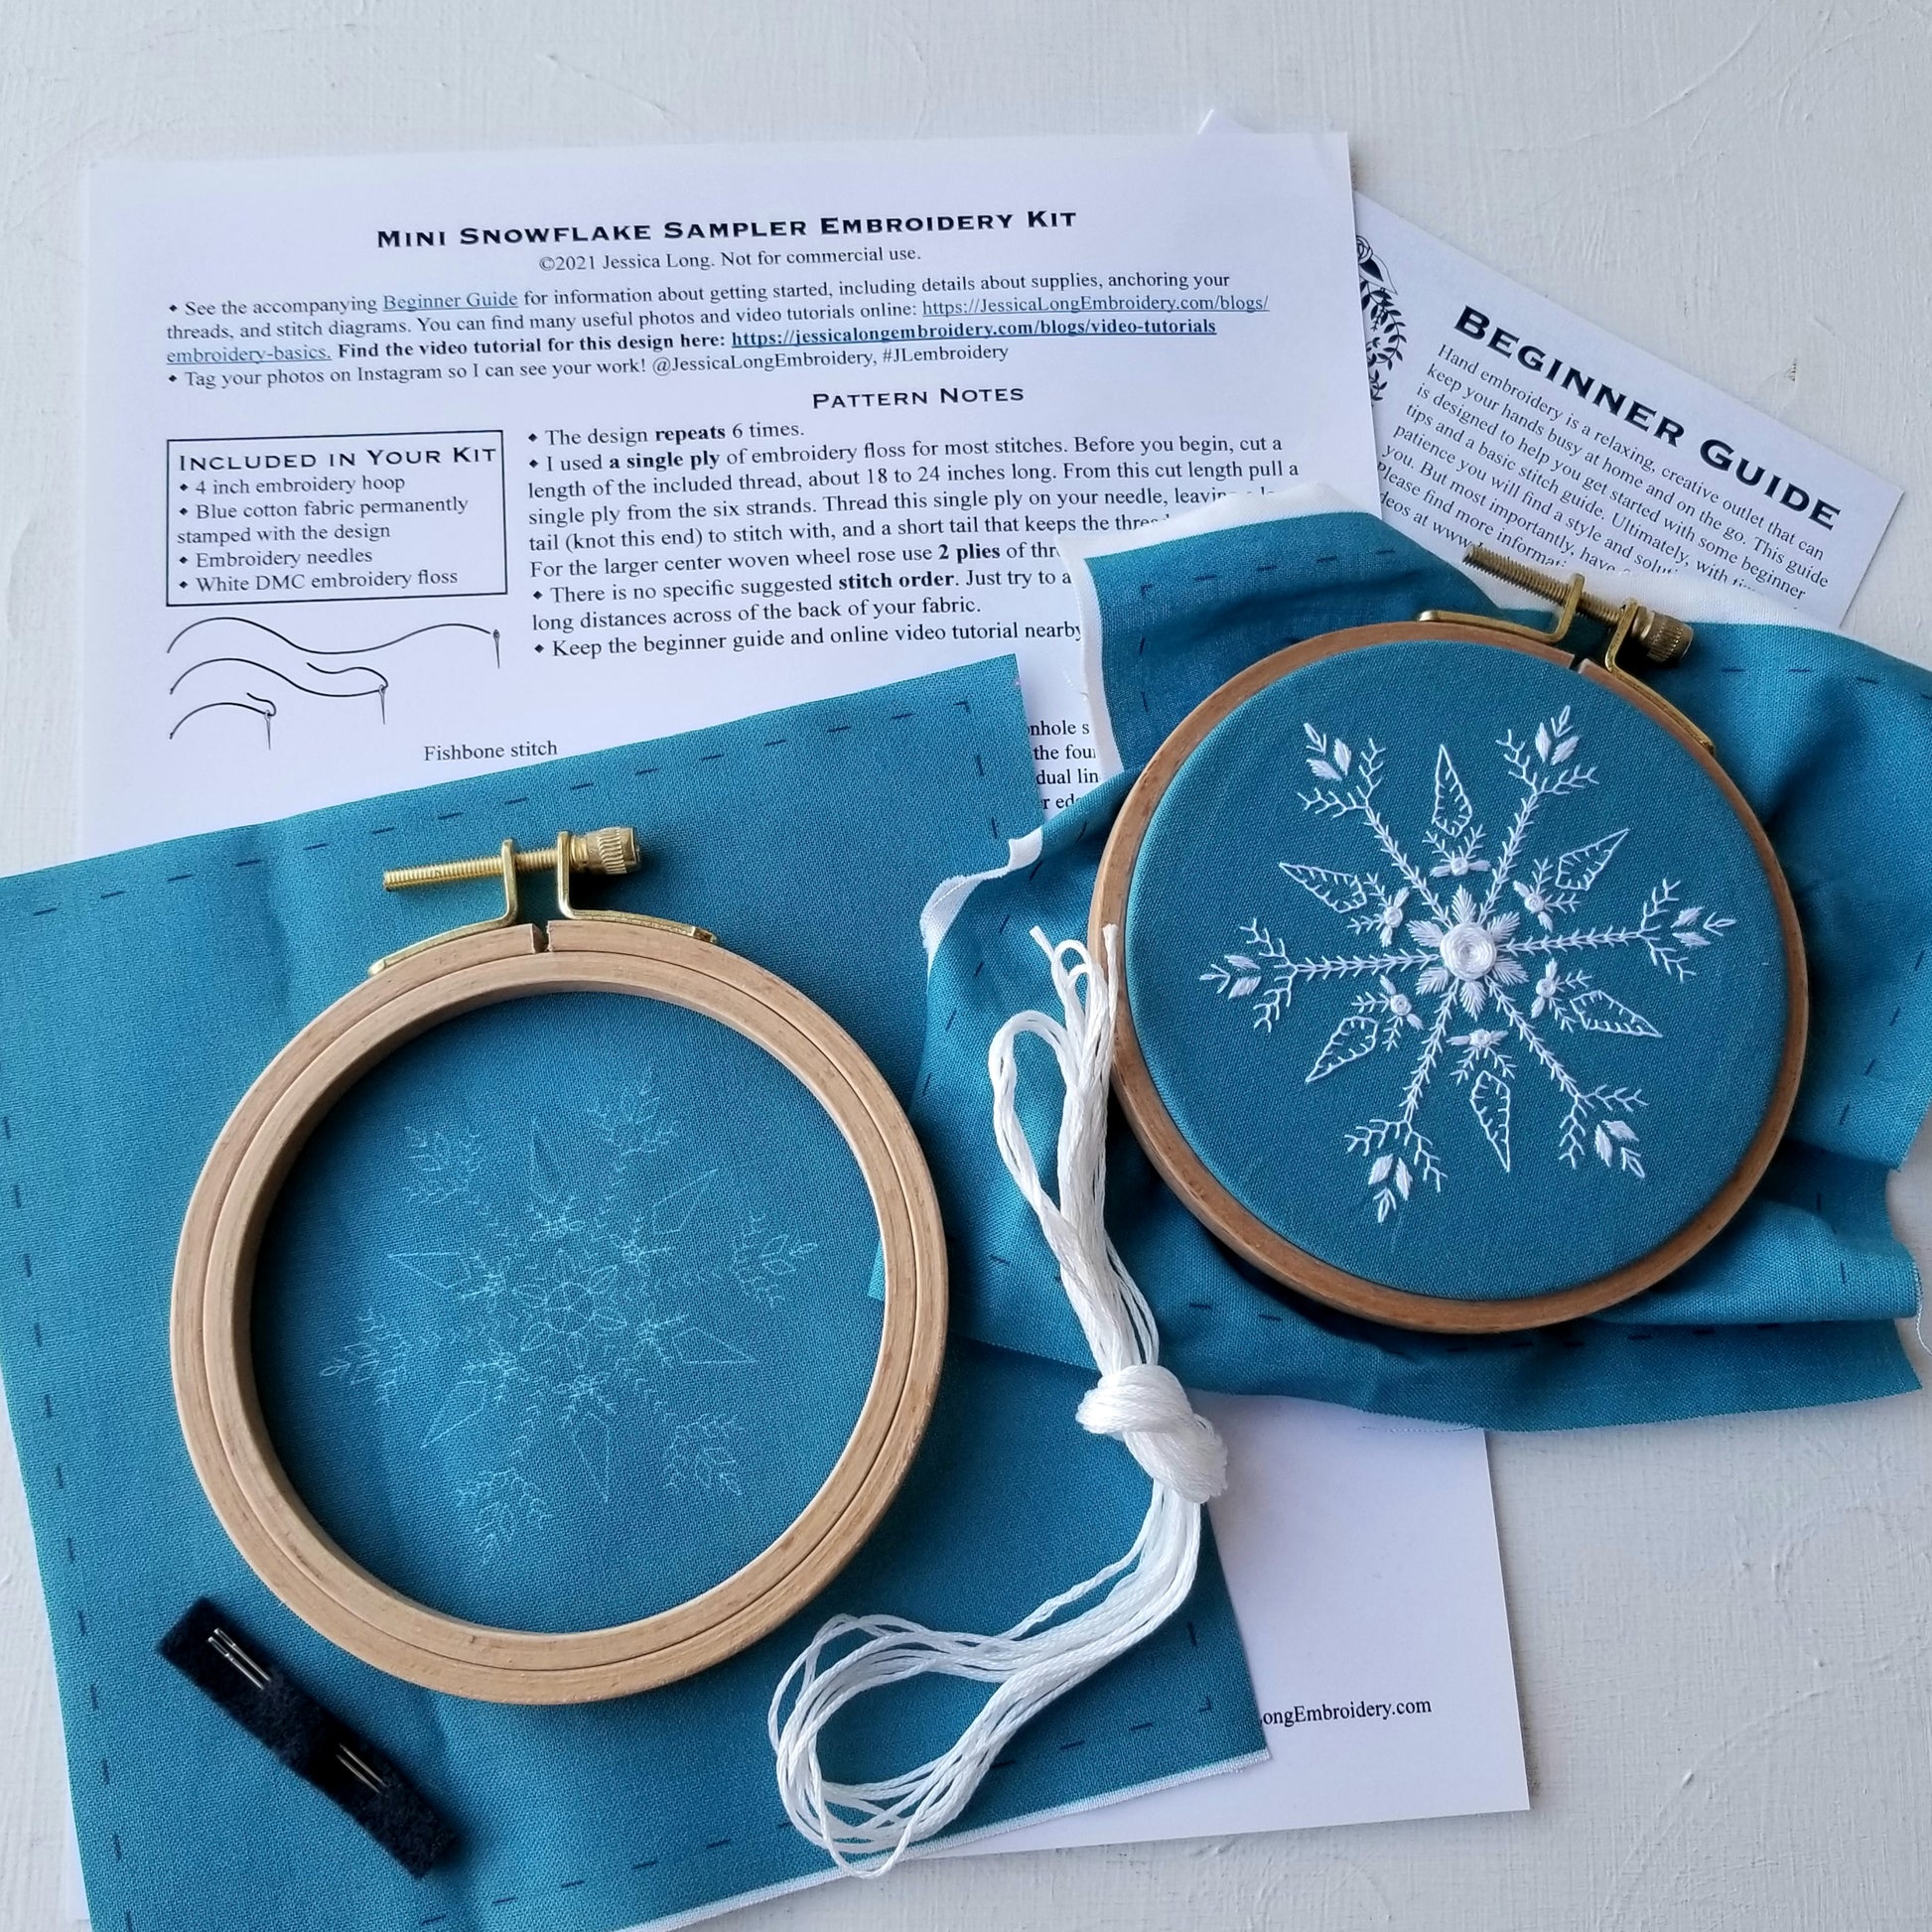 Hand Embroidery Workshop - Cosy Blog